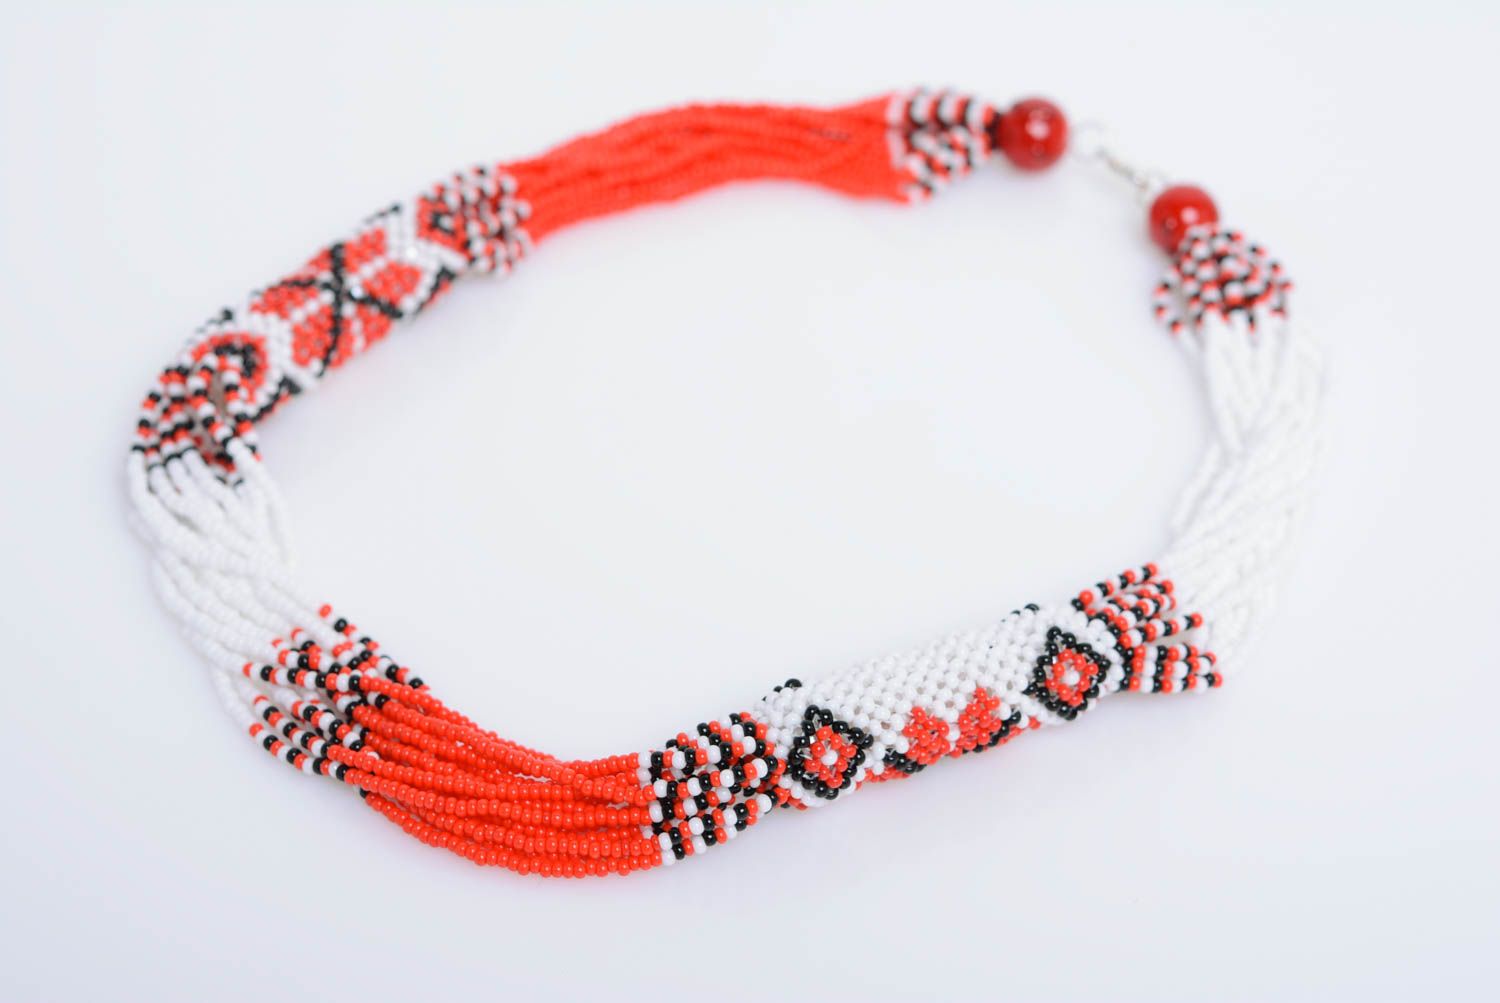 Beaded handmade designer necklace with colorful pattern in ethnic style photo 1